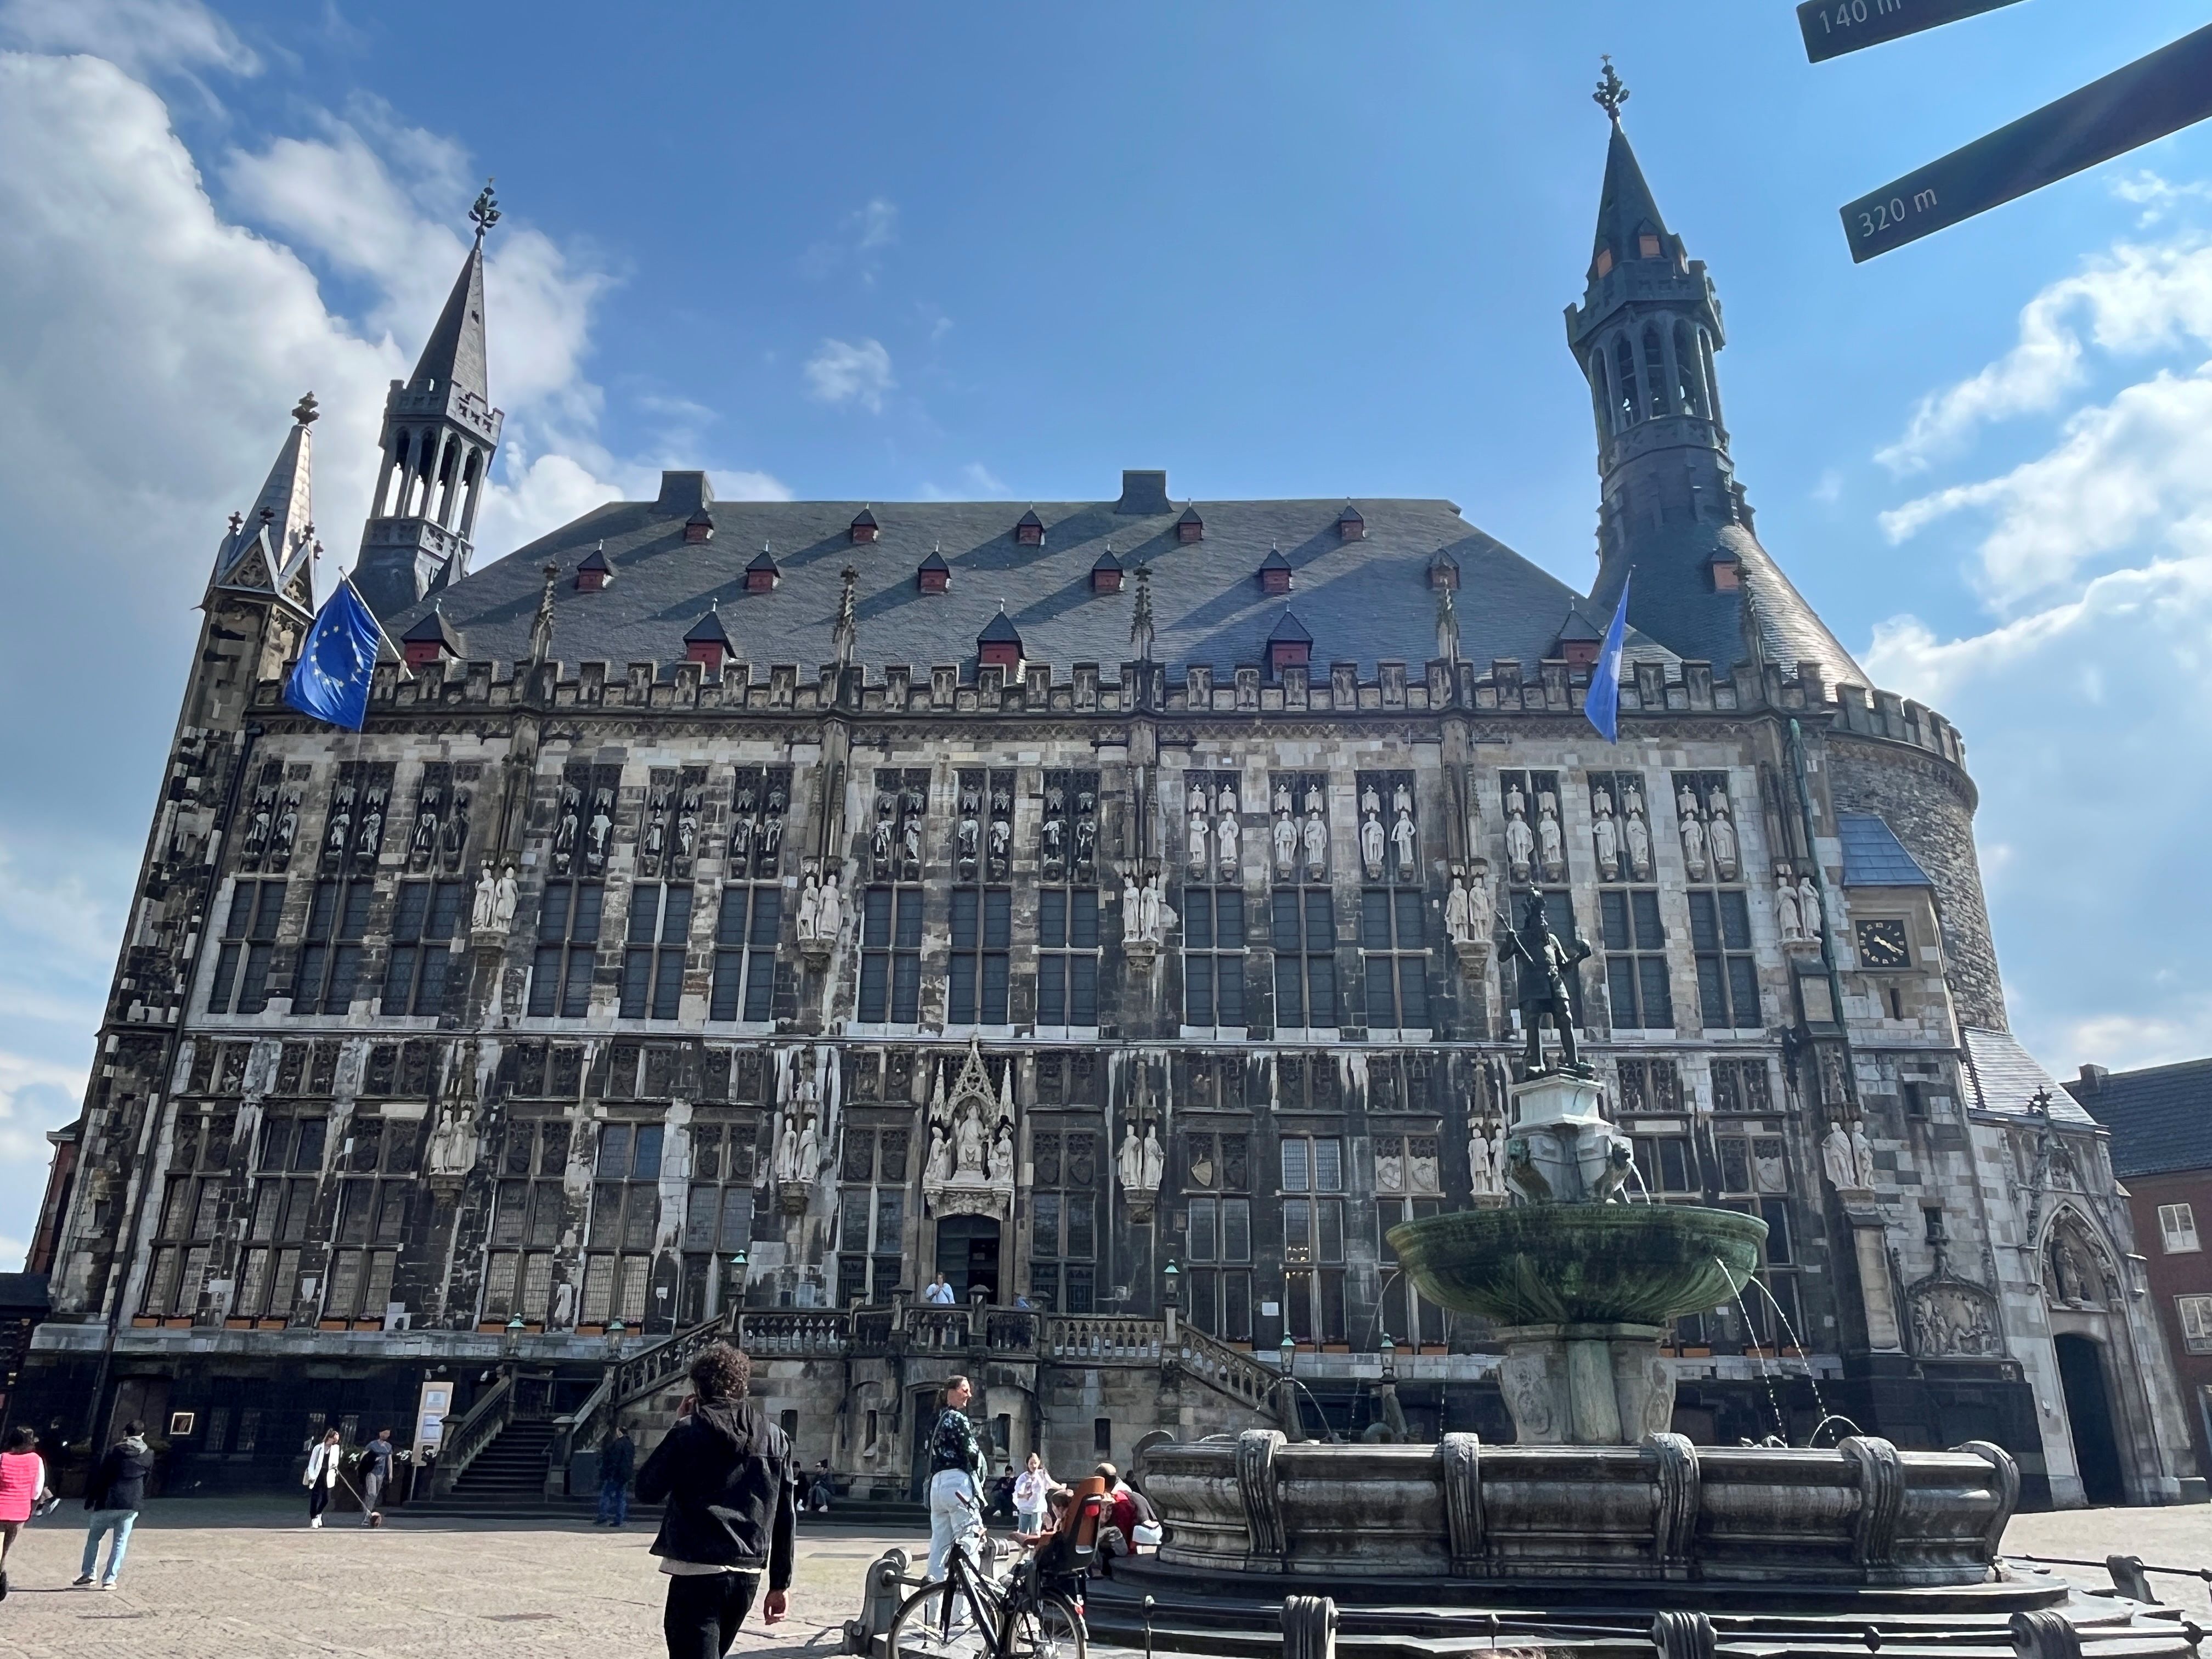 The Medieval city hall in Aachen, also related with emperor Charlemagne.